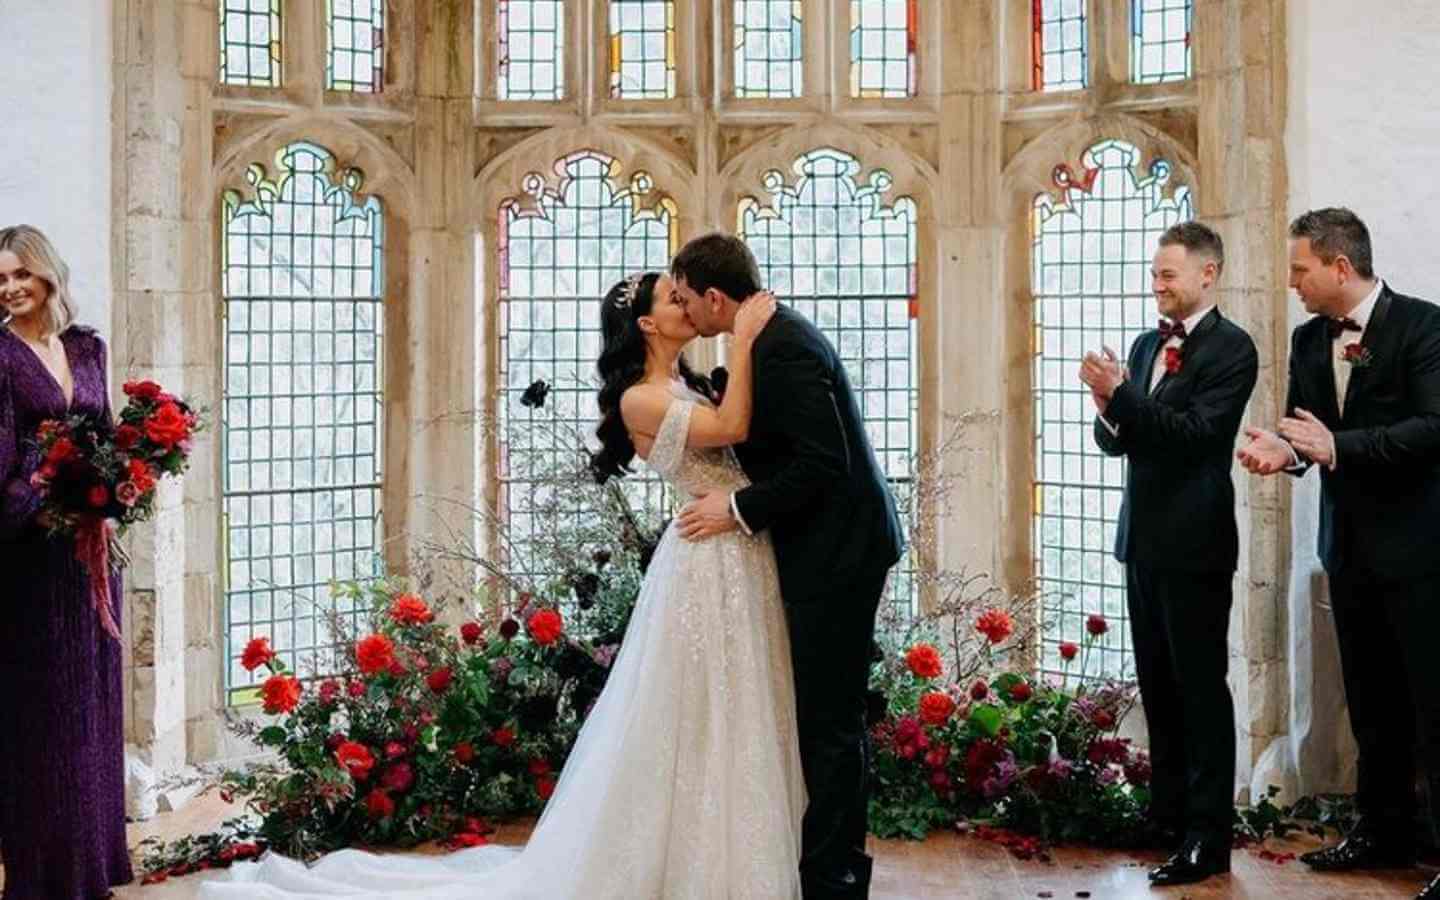 A grand melbourne wedding venue bride and groom kiss in front of window and red flowers